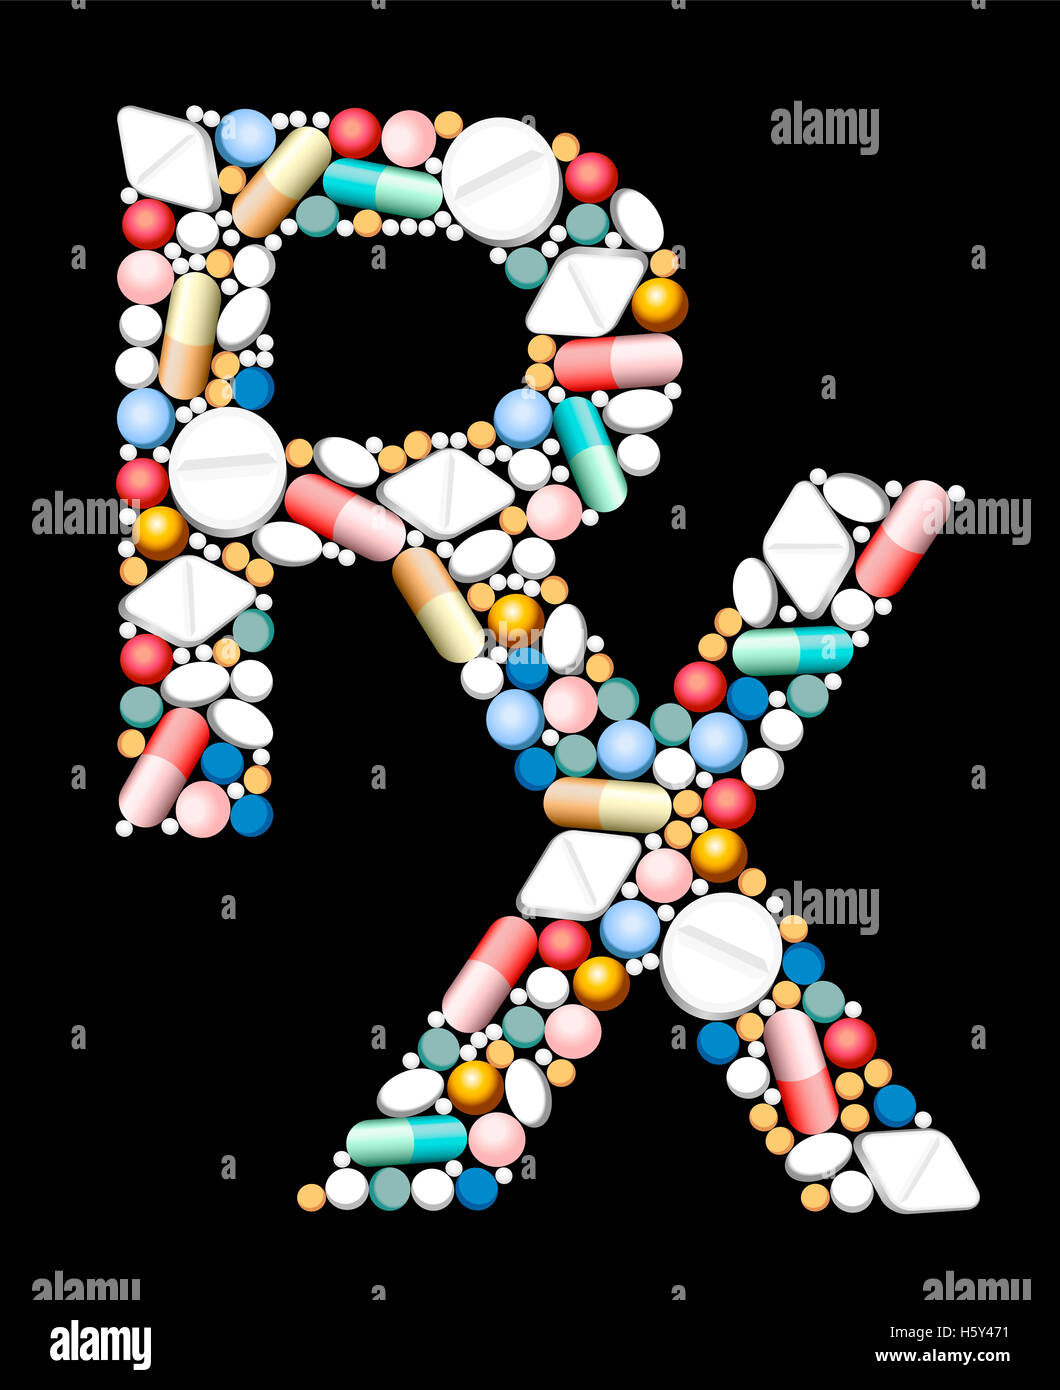 RX - symbol for medical prescription - composed of pills and capsules. Stock Photo